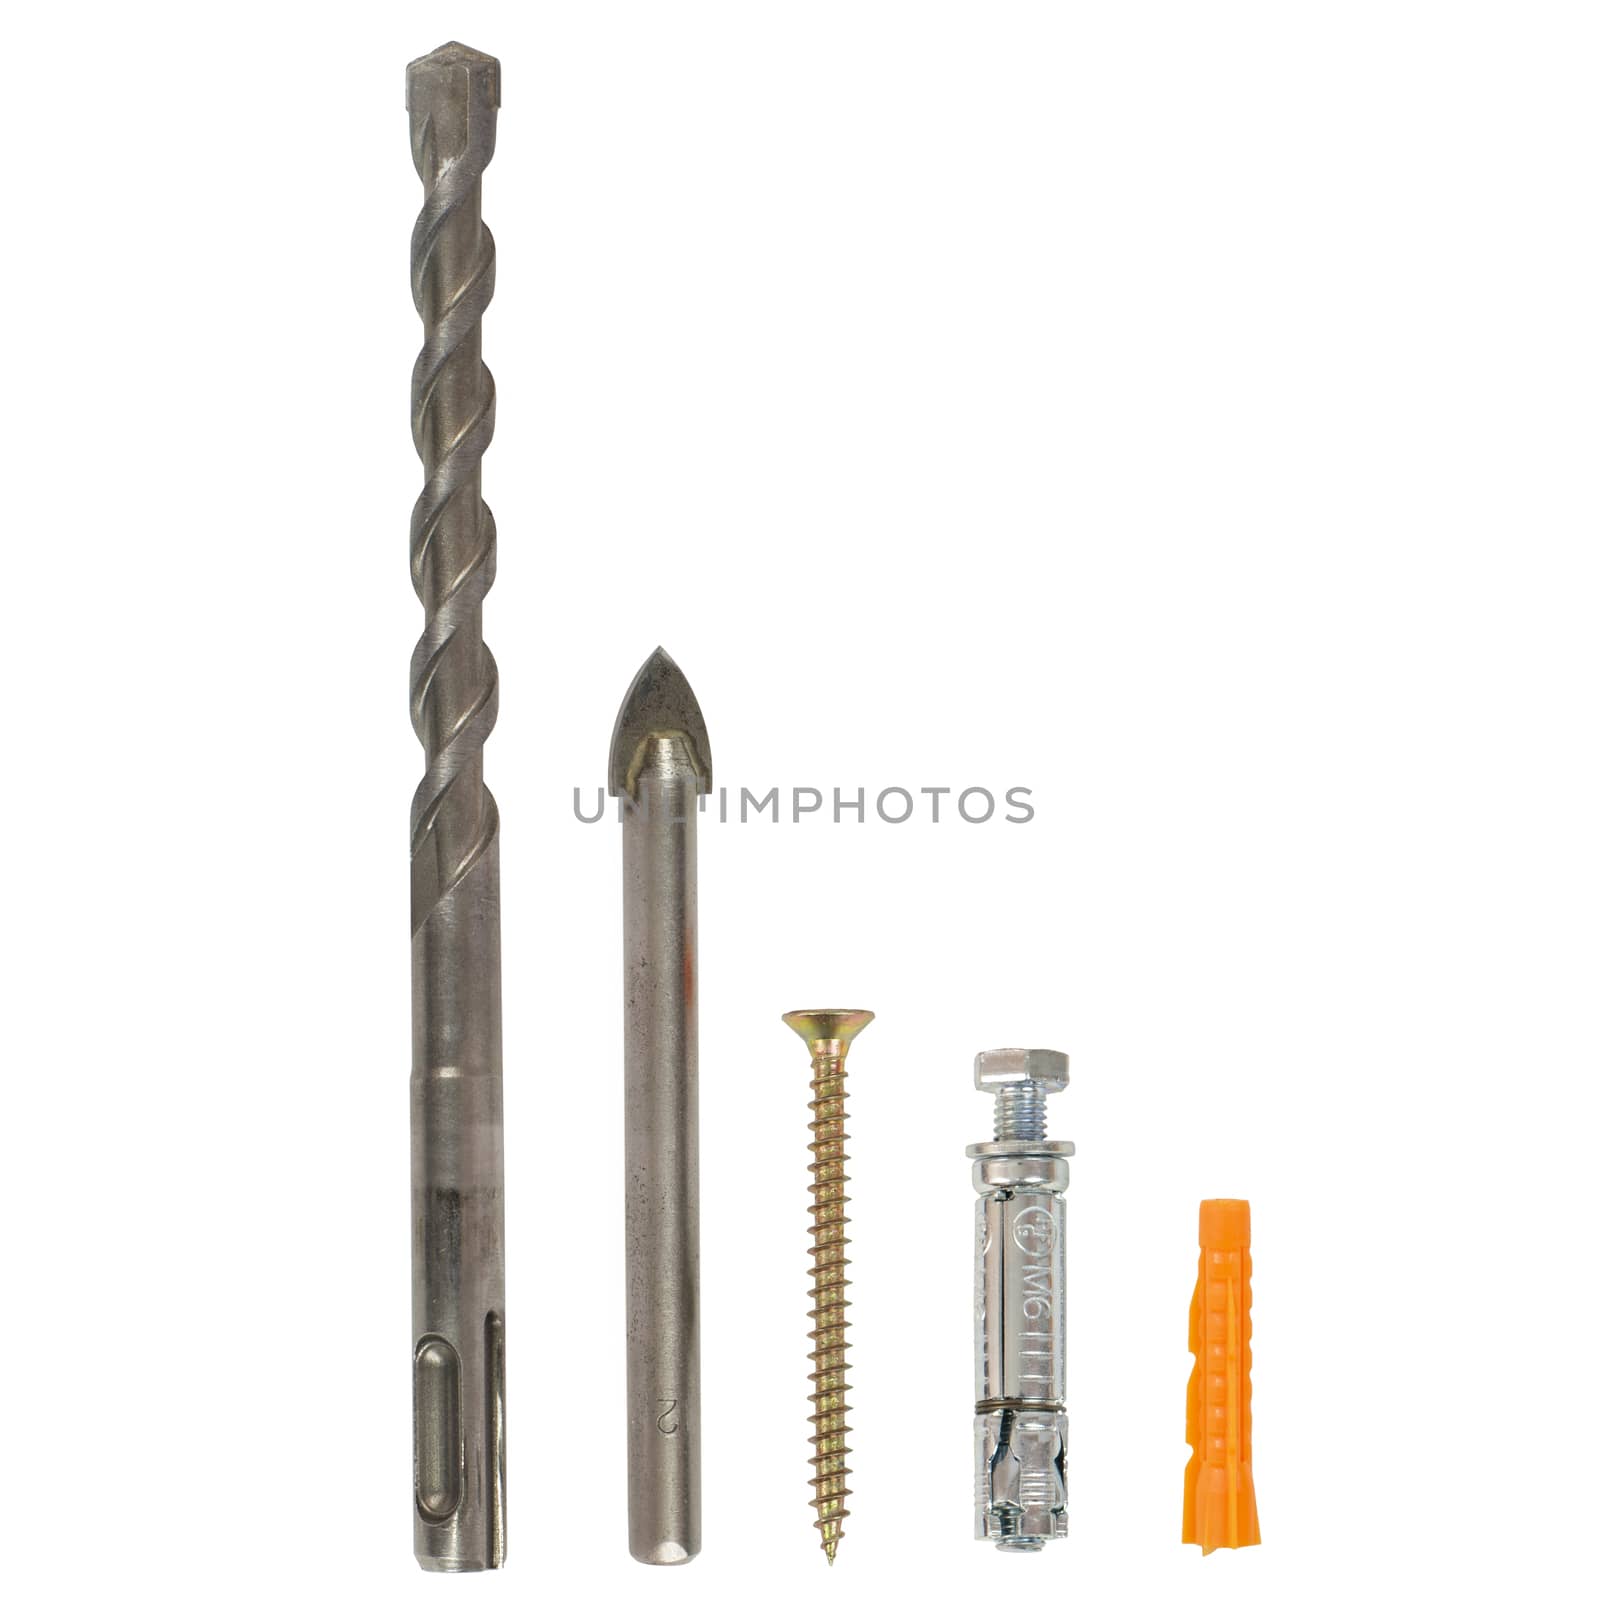 Drills, screw, dubel. Isolated on white background